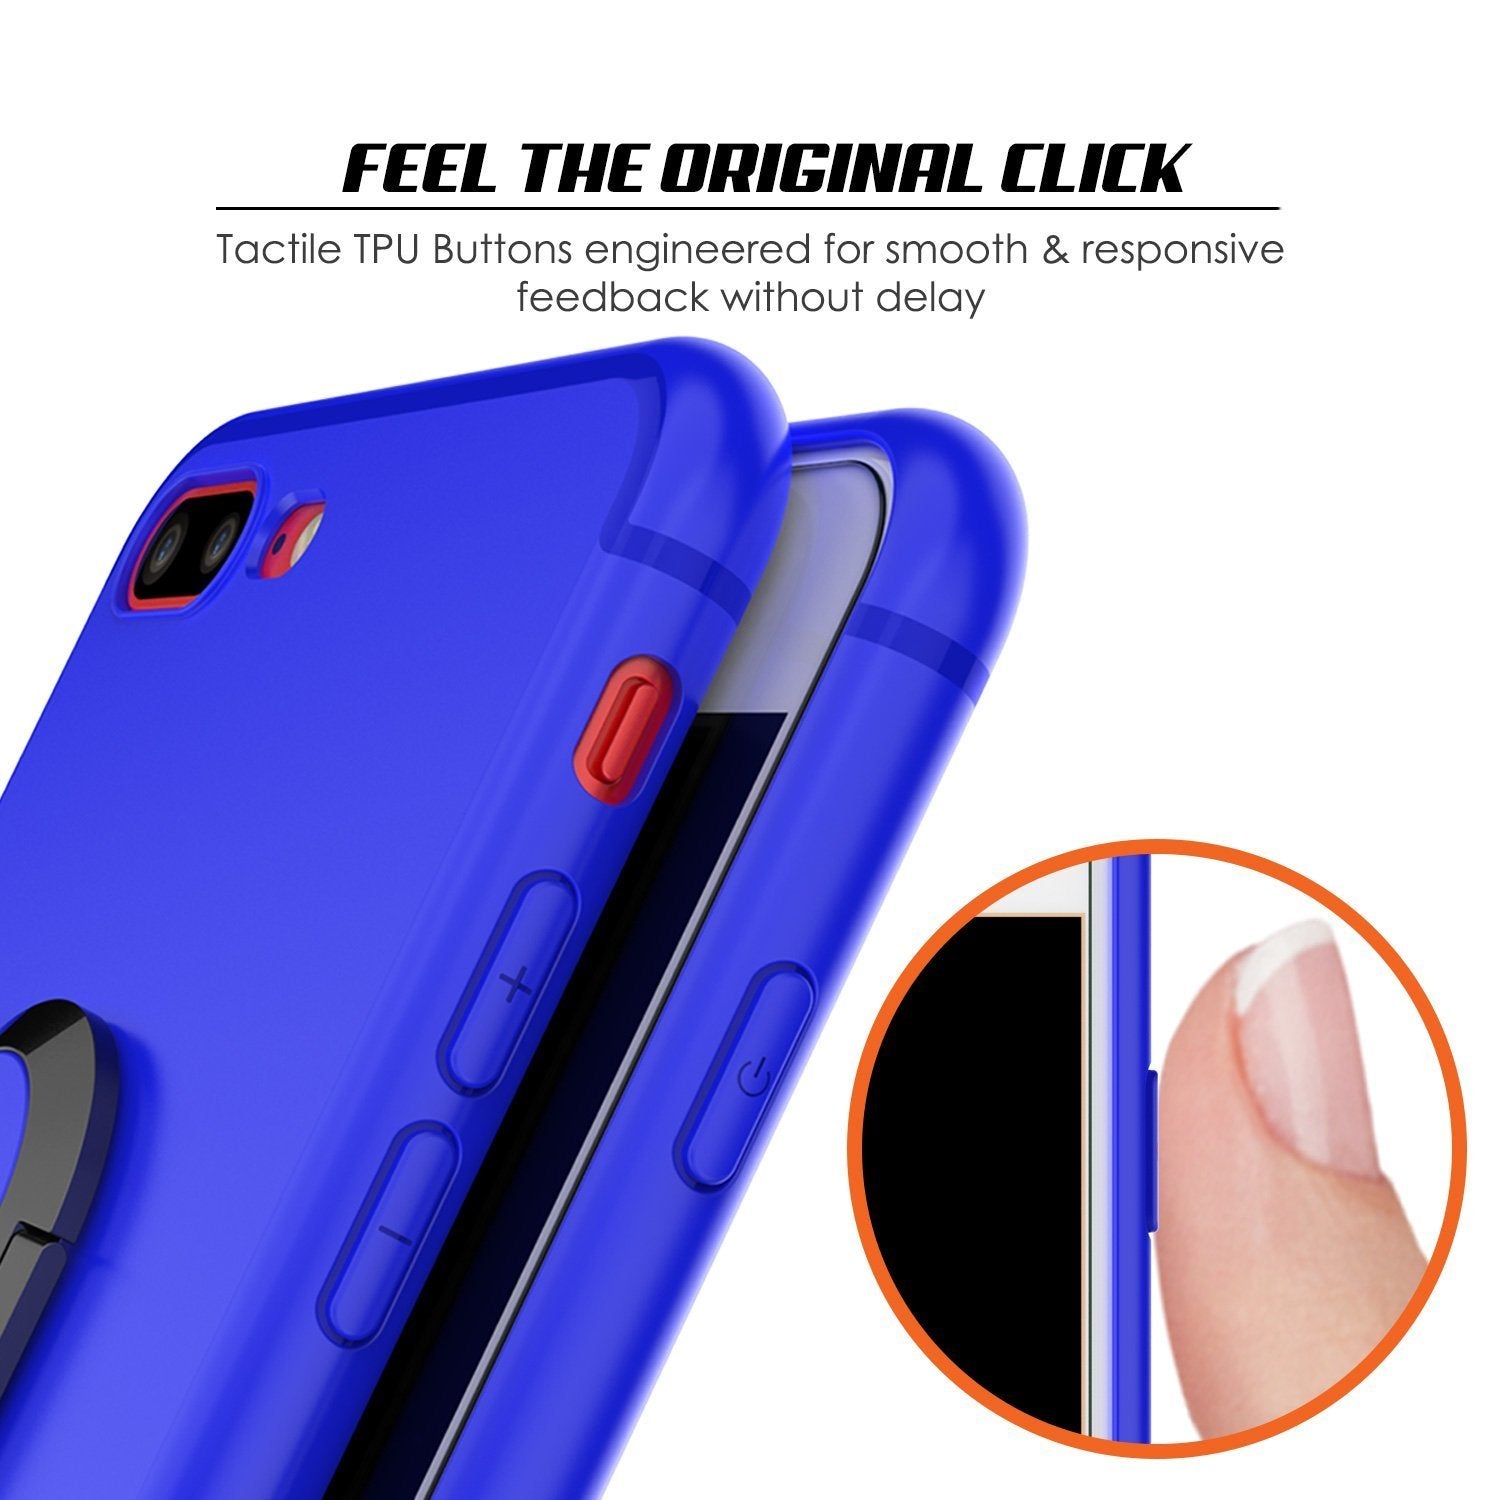 iPhone 8 Plus Case, Punkcase Magnetix Protective TPU Cover W/ Kickstand, Ring Grip Holder & Metal Plate for Magnetic Car Phone Mount PLUS Tempered Glass Screen Protector for Apple iPhone 7+/8+ [Blue]